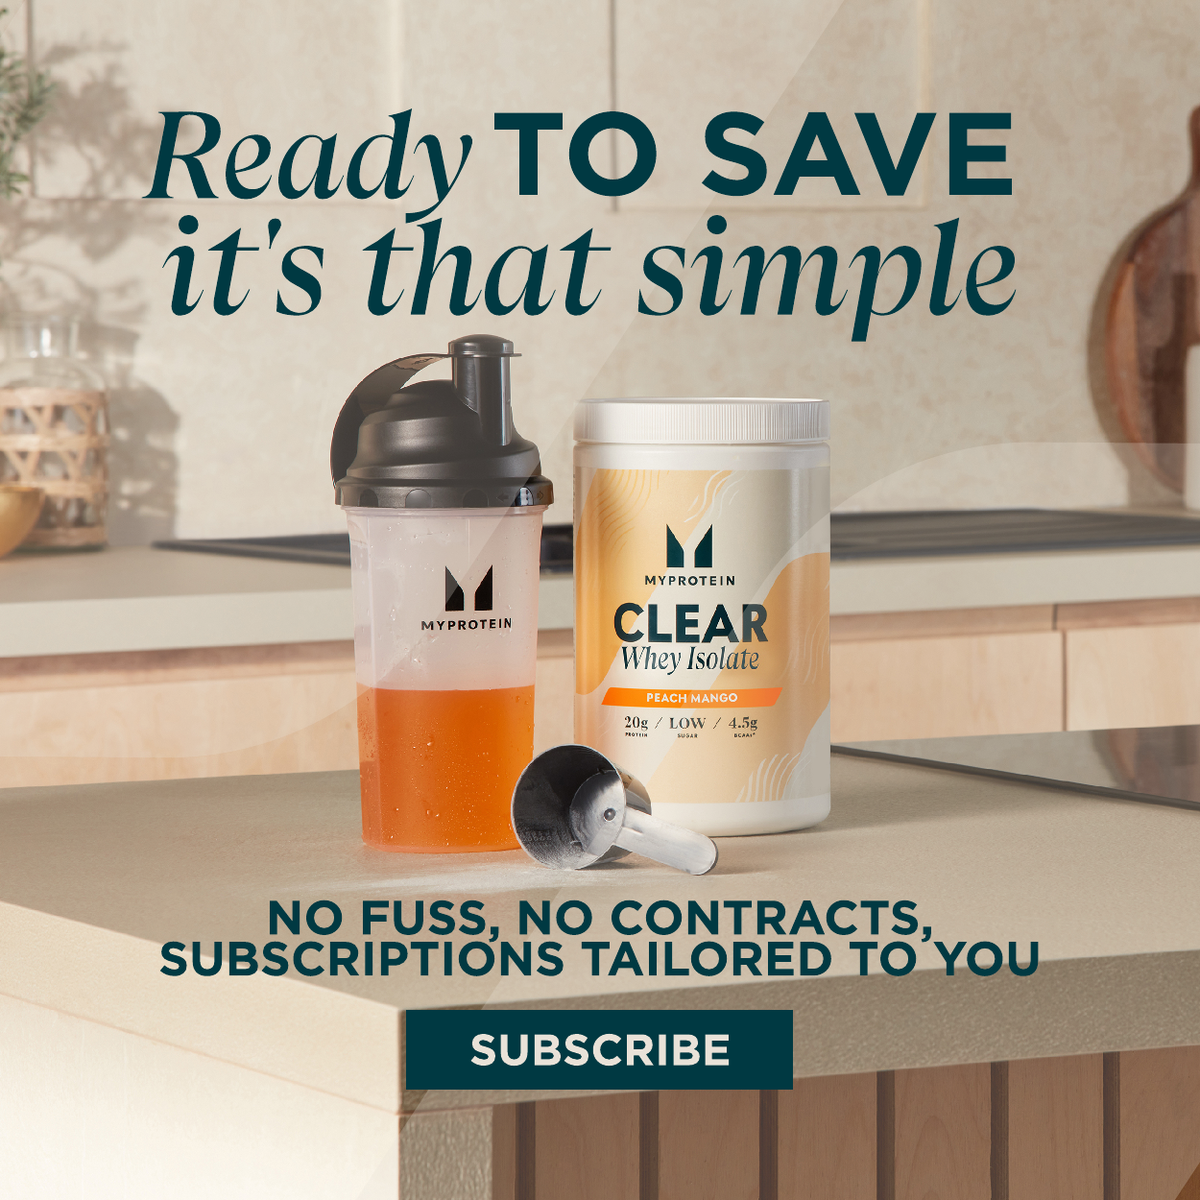 Ready to save, it's simple. No fuss, No contracts, Subscriptions tailored to you.